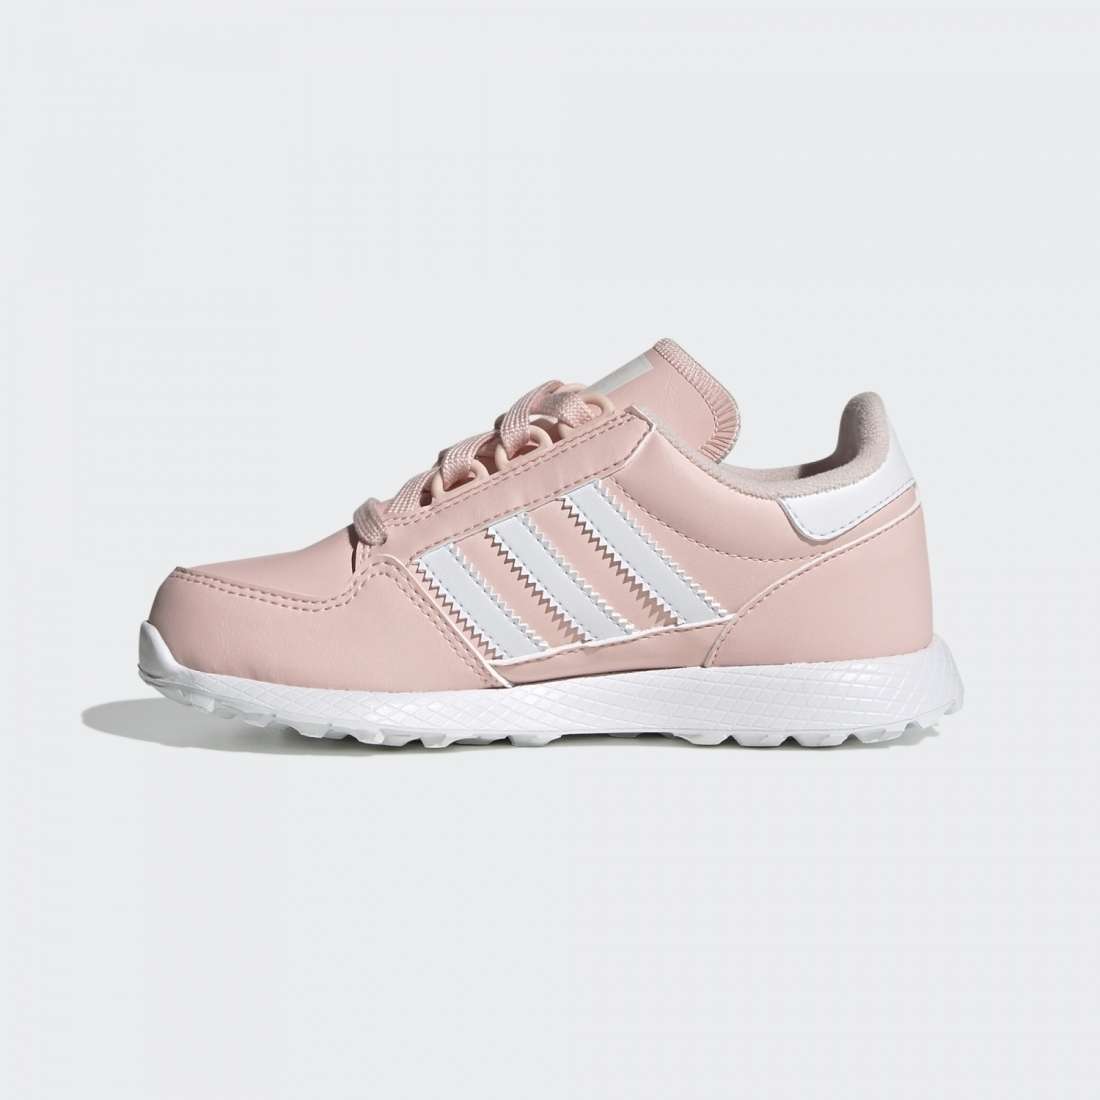 ADIDAS FOREST GROVE C PINK